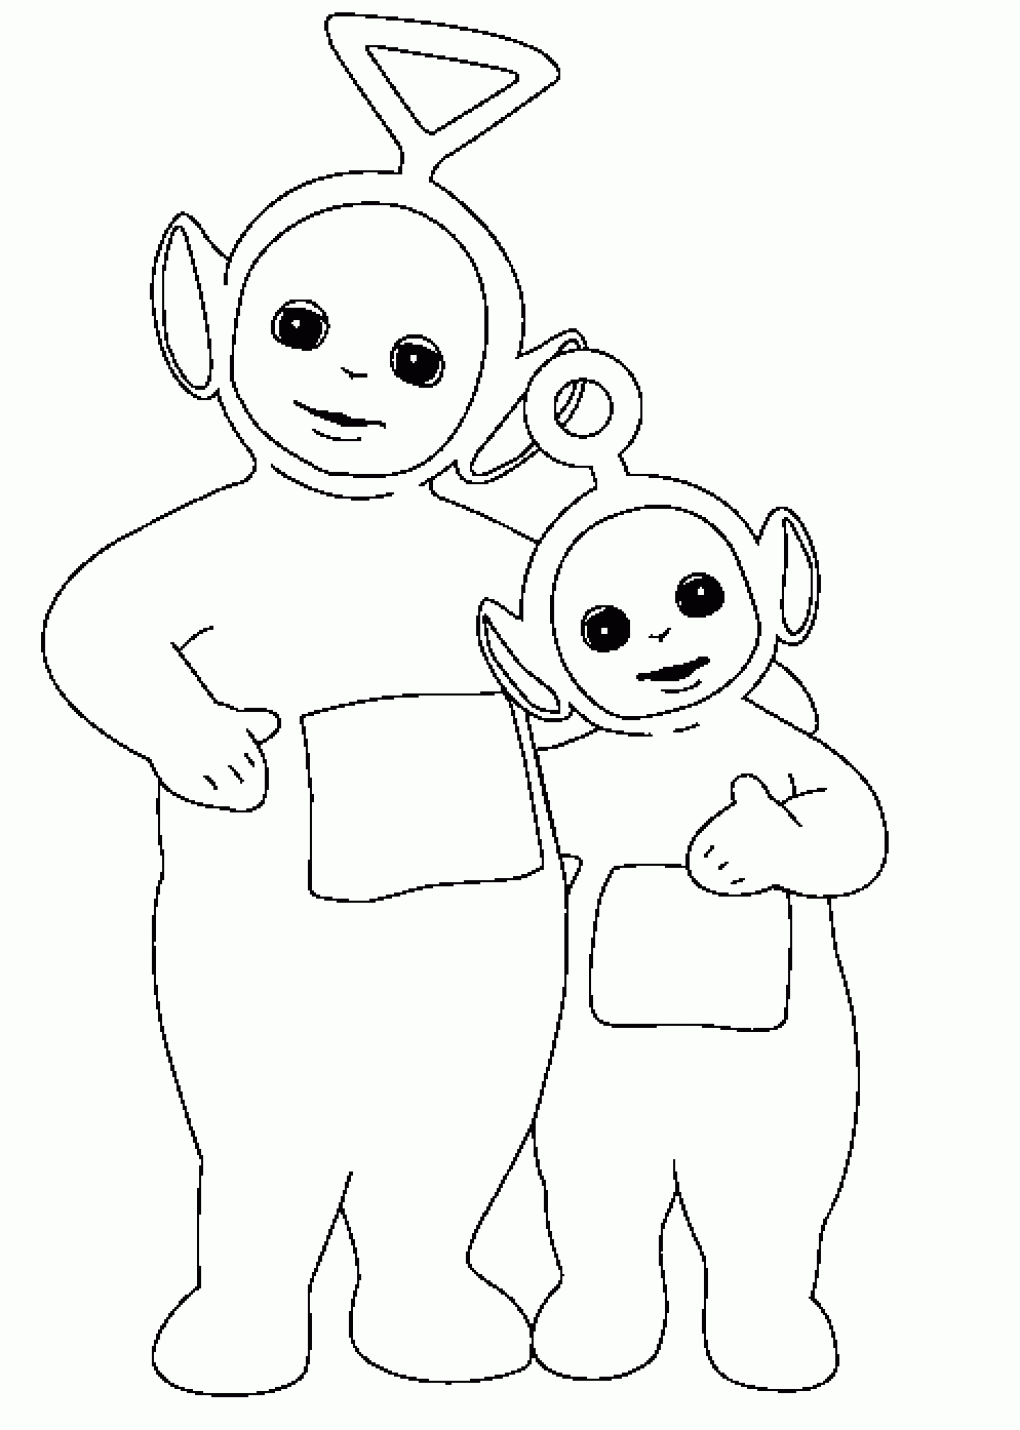 teletubbies colouring pictures to print printable teletubbies coloring pages for kids cool2bkids print teletubbies to pictures colouring 